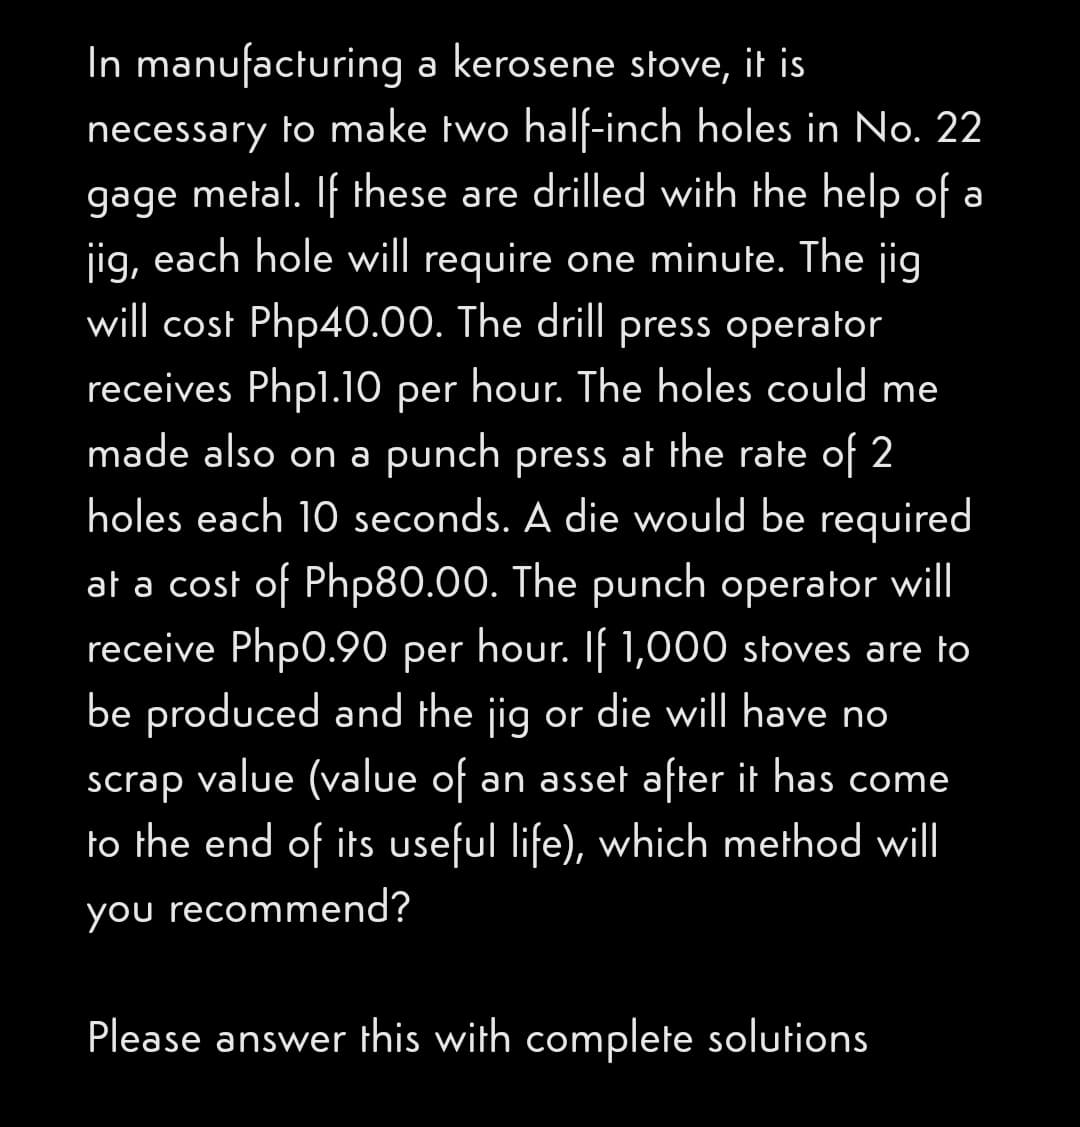 In manufacturing a kerosene stove, it is
necessary to make two half-inch holes in No. 22
metal. If these are drilled with the help of a
gage
jig, each hole will require one minute. The jig
will cost Php40.00. The drill press operator
receives Phpl.10 per hour. The holes could me
made also on a punch press at the rate of 2
holes each 10 seconds. A die would be required
at a cost of Php80.00. The punch operator will
receive Php0.90 per hour. If 1,000 stoves are to
be produced and the jig or die will have no
scrap value (value of an asset after it has come
to the end of its useful life), which method will
you recommend?
Please answer this with complete solutions
